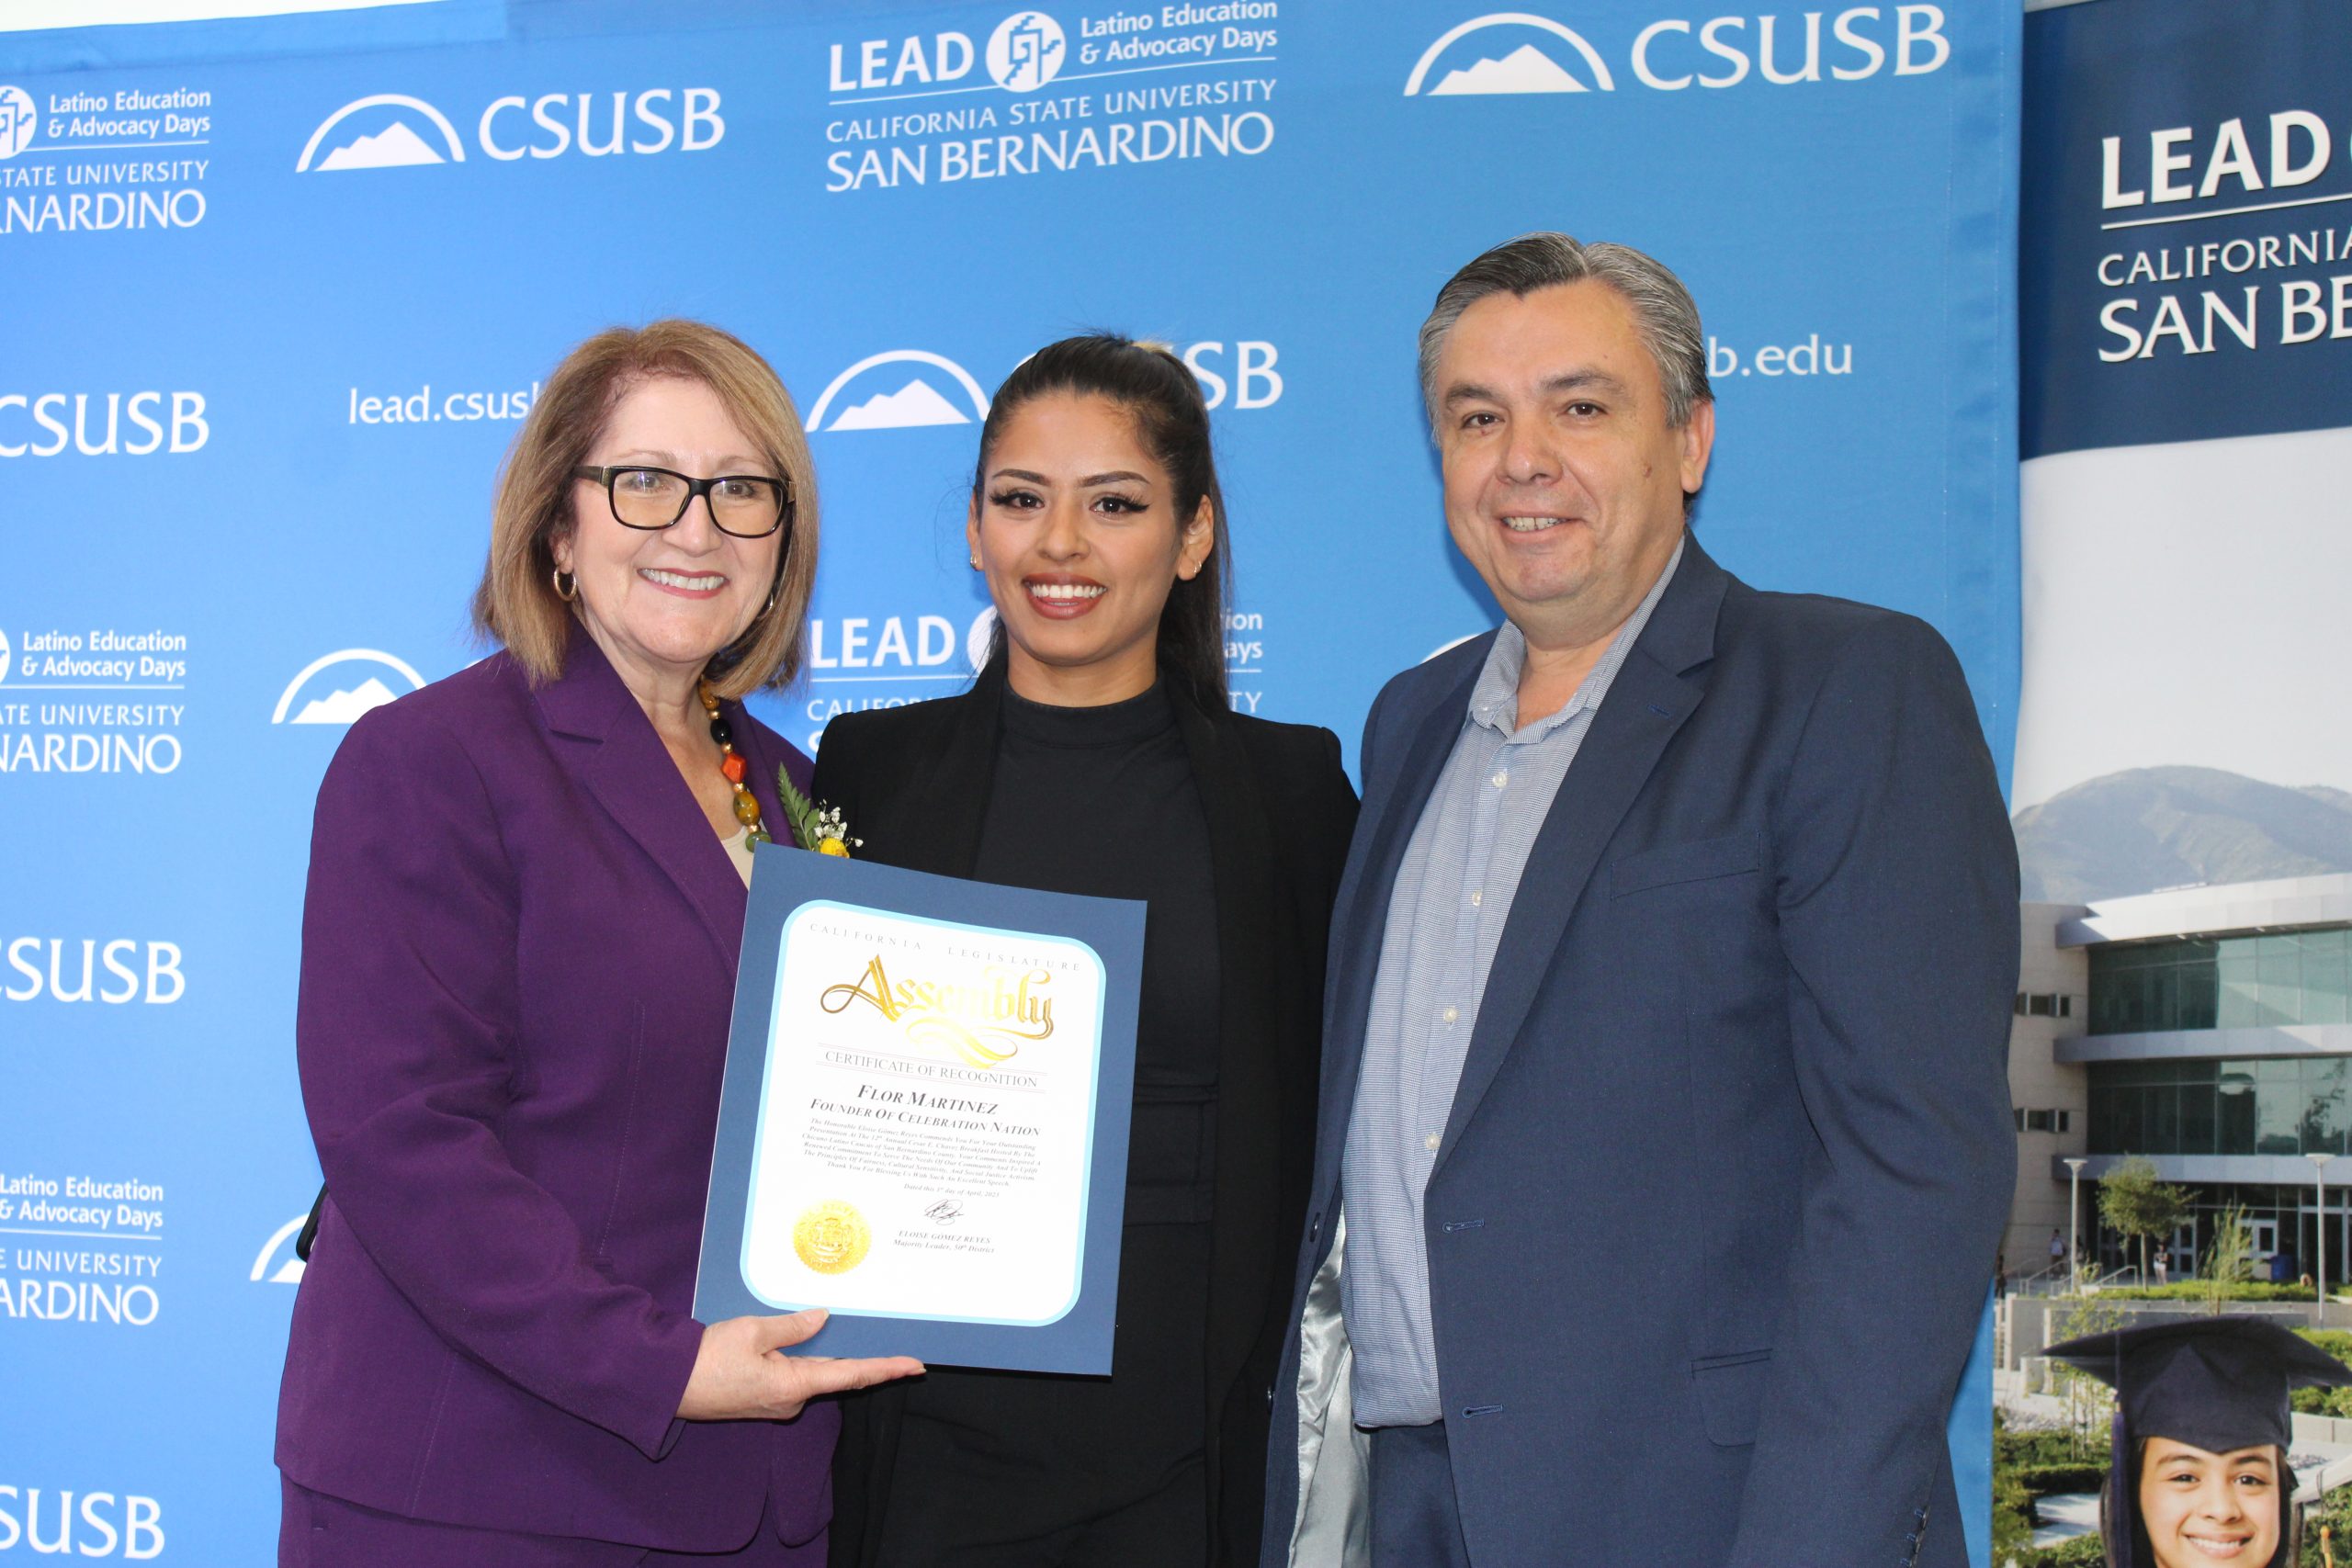 CSUSB’s 12th Annual Cesar Chavez Memorial Breakfast: Addressing Food Scarcity and Impact of Agricultural Automation on Farm Workers